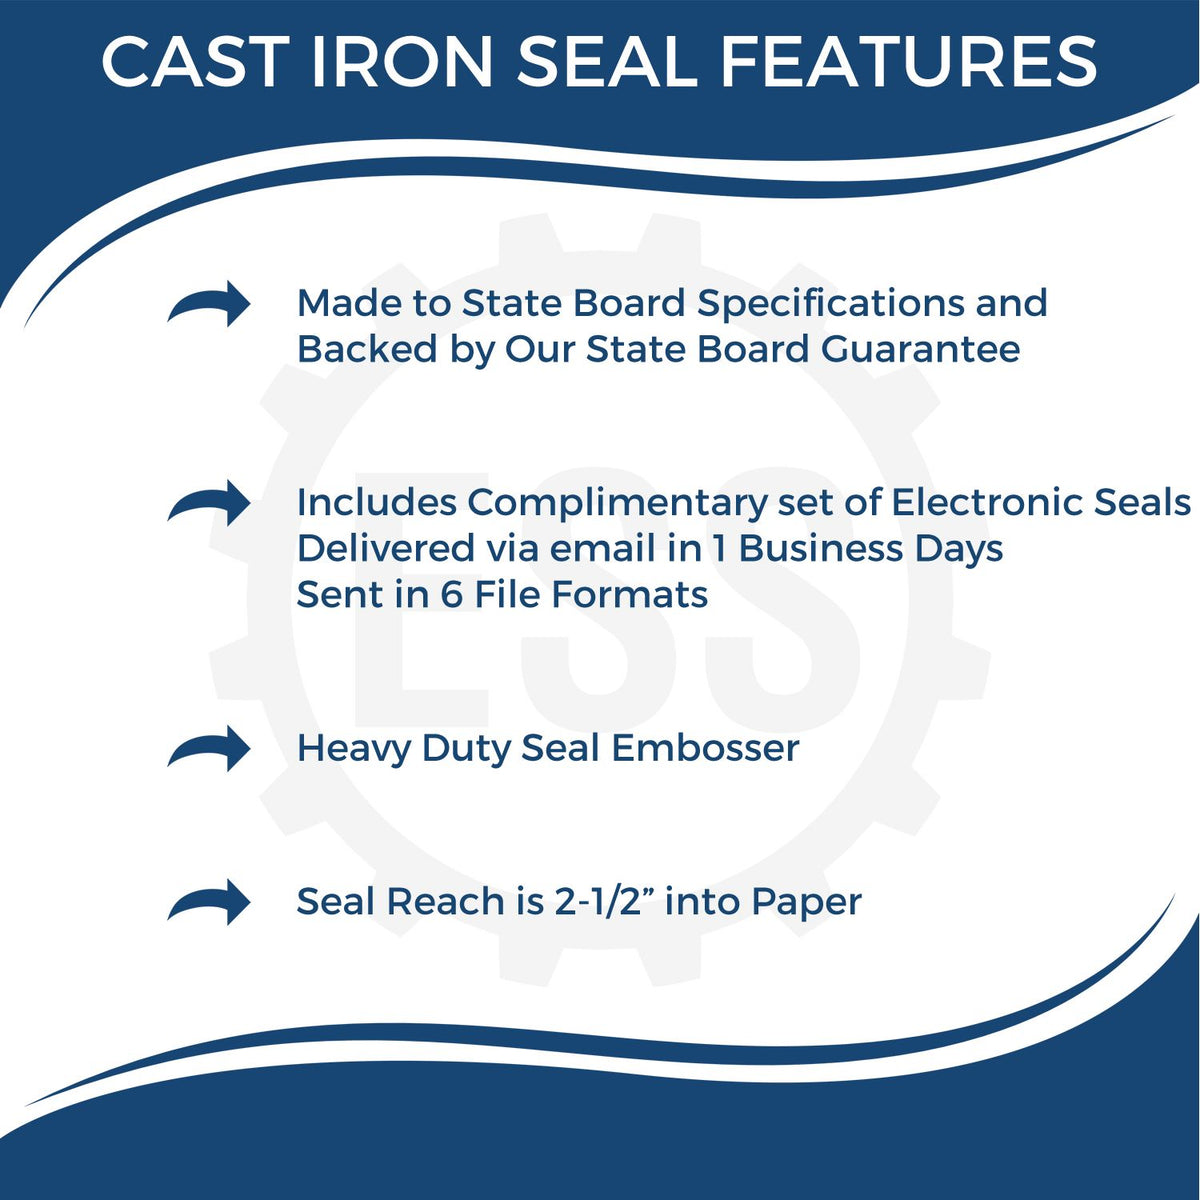 A picture of an infographic highlighting the selling points for the Heavy Duty Cast Iron Maryland Architect Embosser